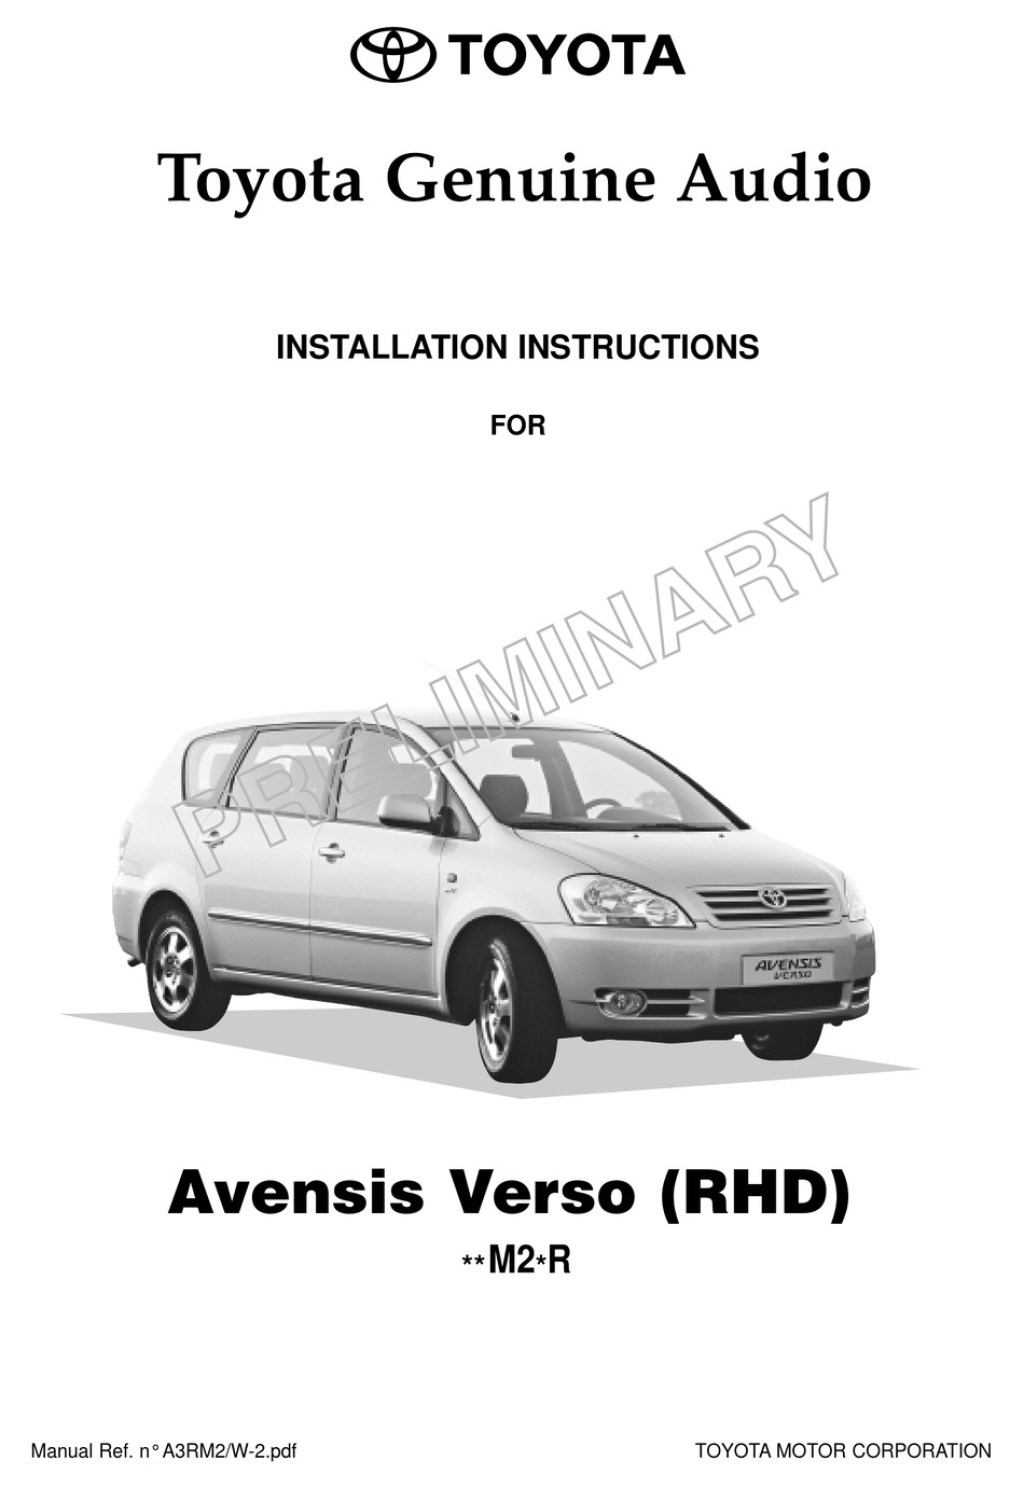 Picture of: TOYOTA AUDIO  AVENSIS VERSO INSTALLATION INSTRUCTIONS MANUAL